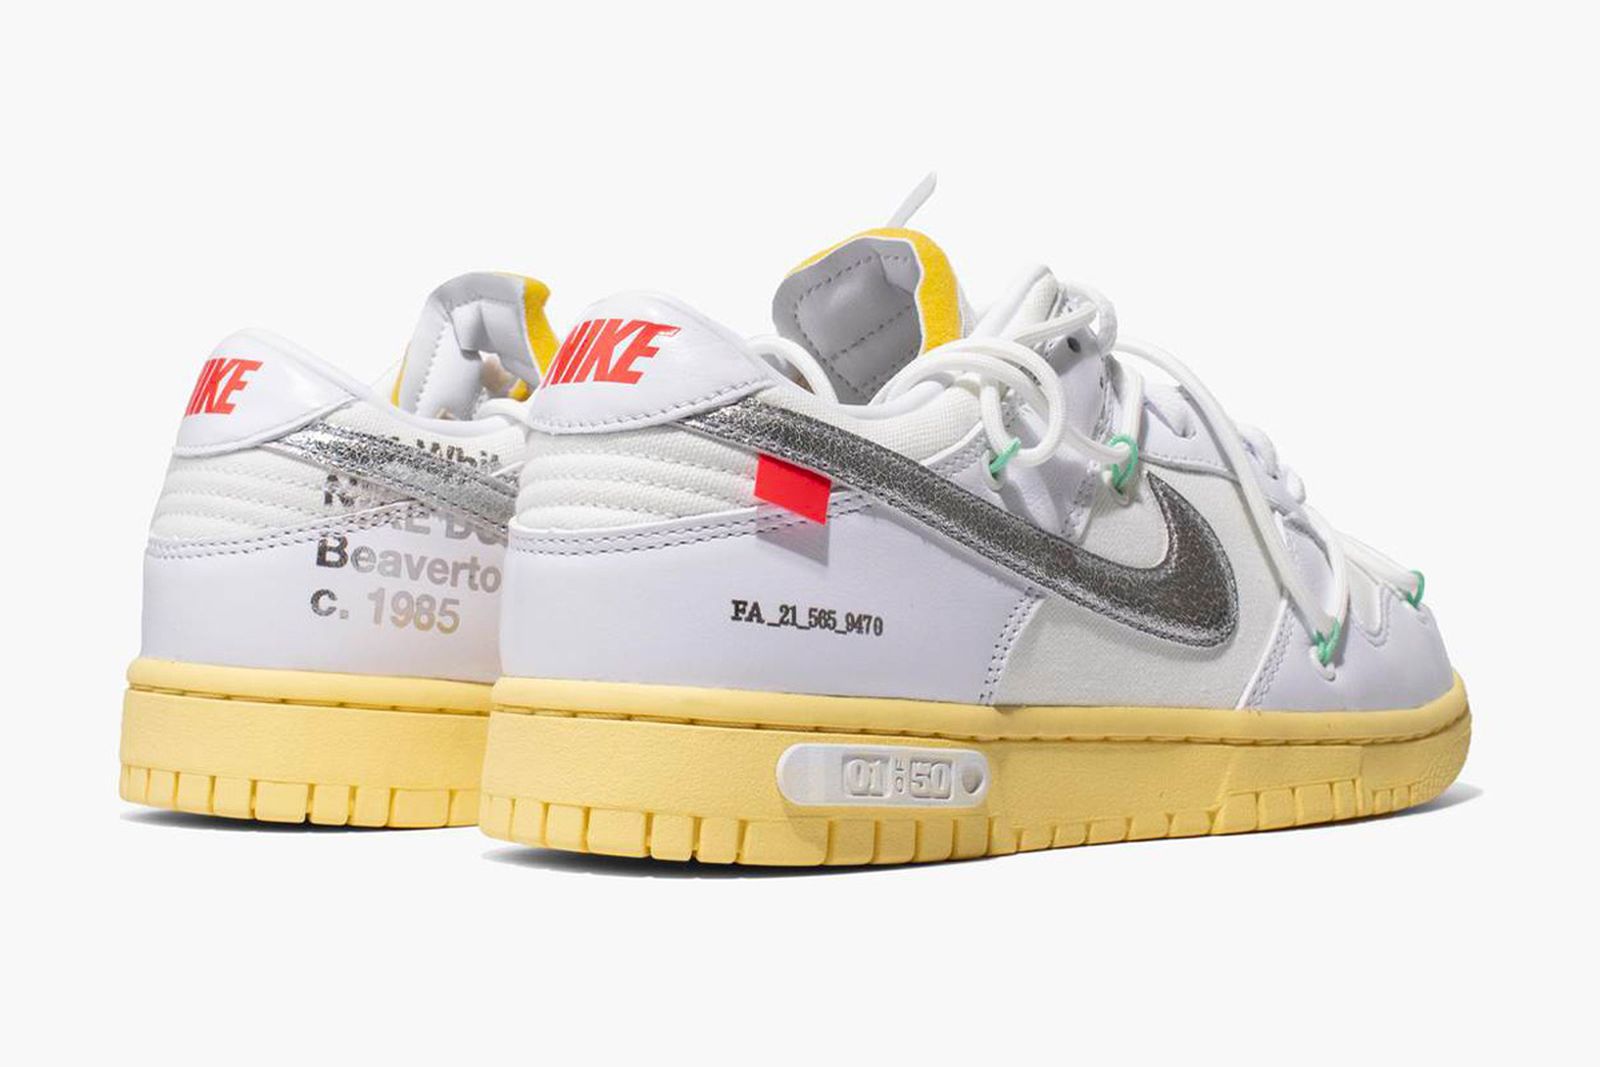 Rytmisk skål excentrisk 10 of the Best Nike x Off-White™ Sneakers at Hype Clothinga